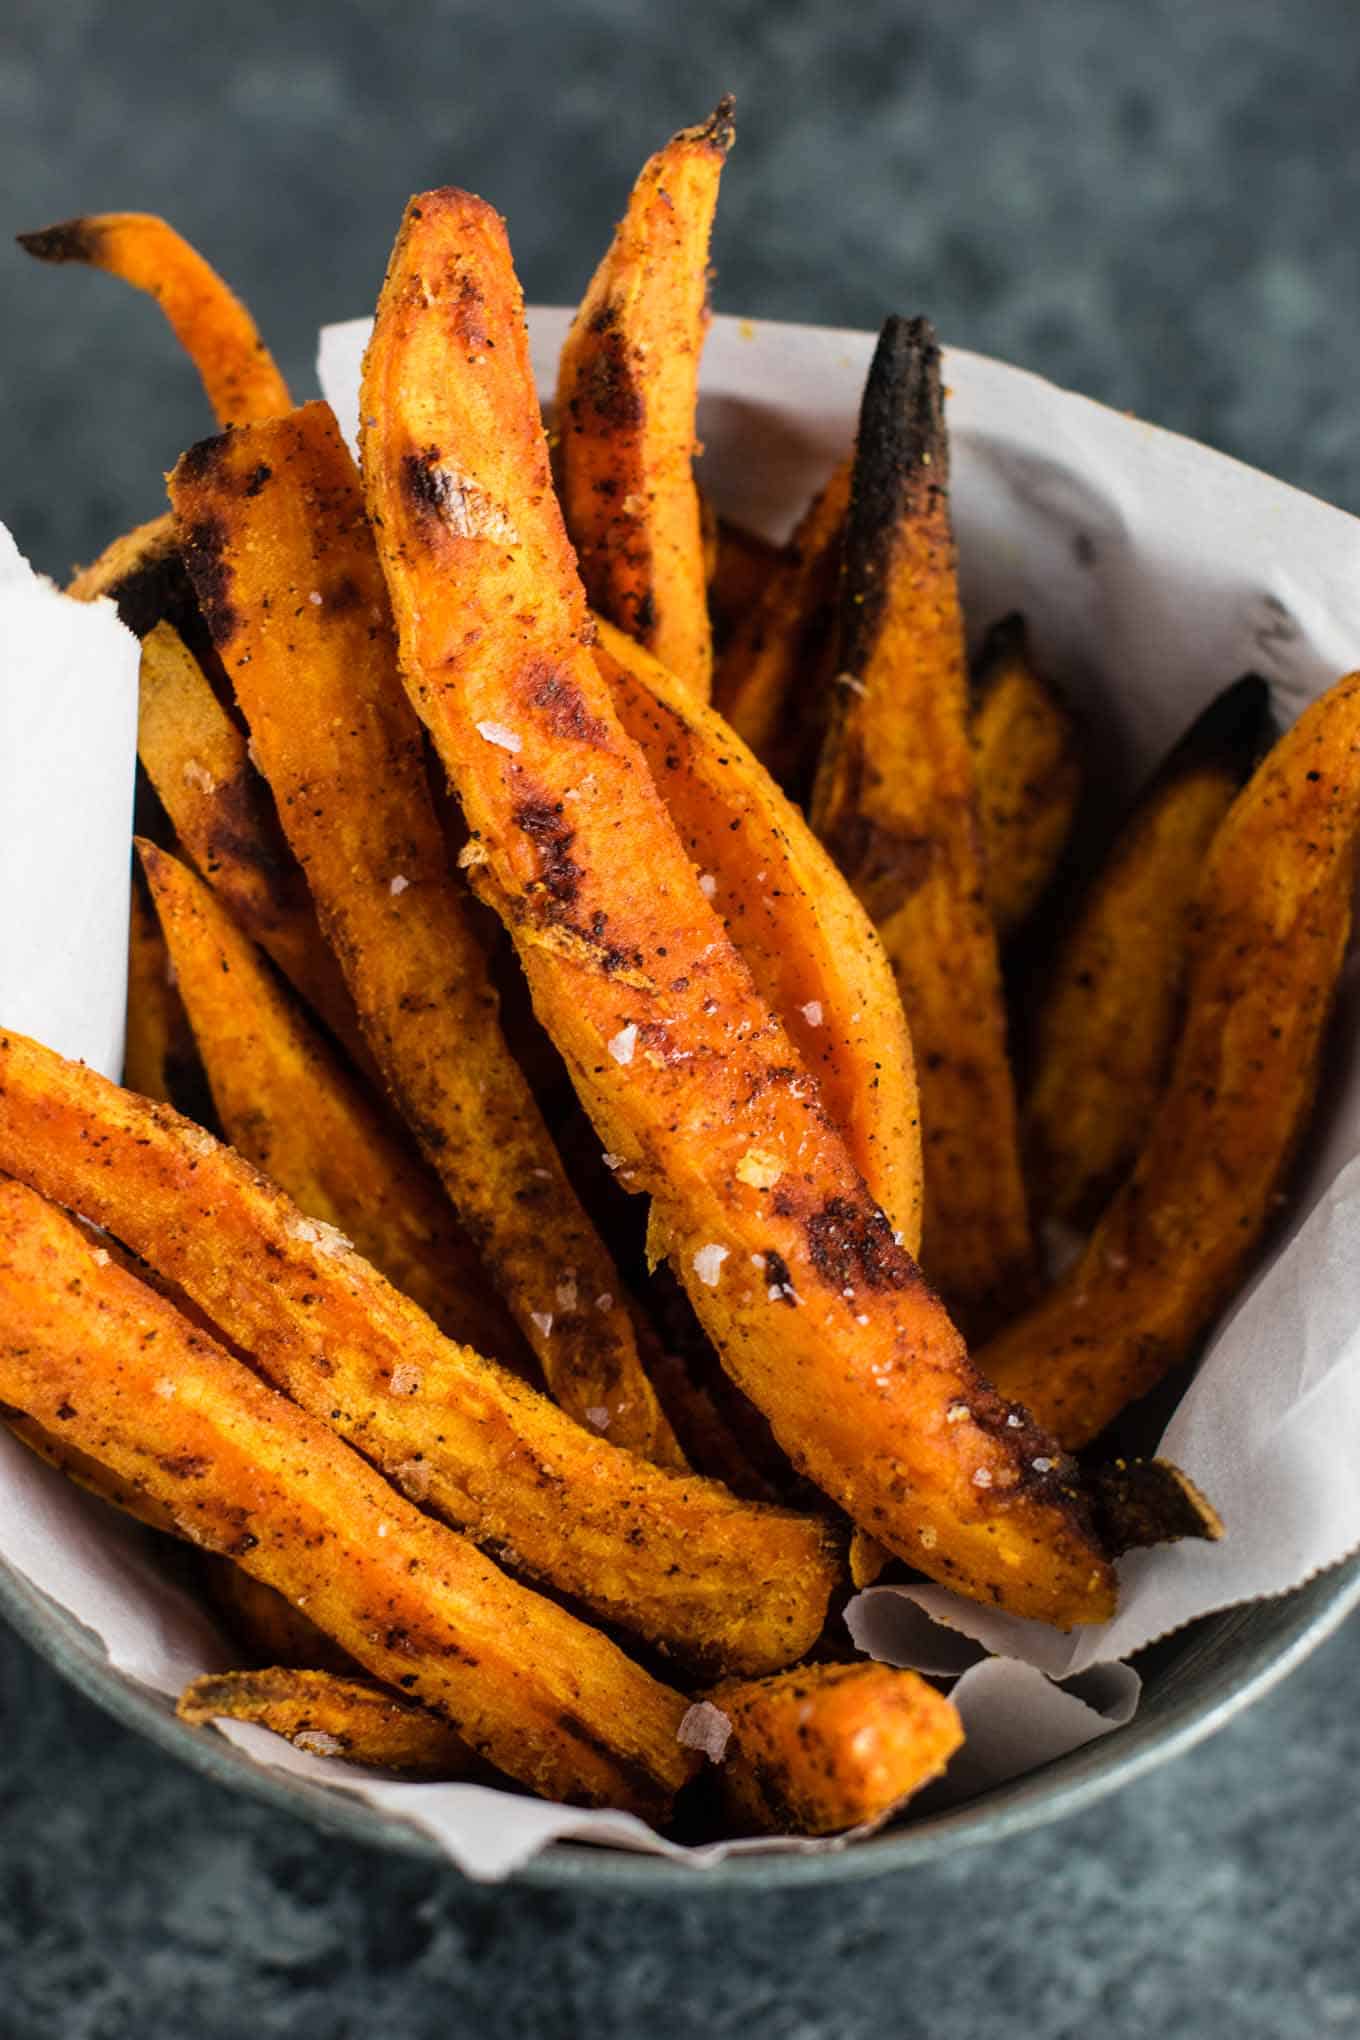 I am obsessed with these roasted sweet potato fries! The perfect combo of salty sweet and the spices are perfect. So easy and go with everything! #sweetpotatofries #vegetables #sidedish #vegan #dinner #roastedsweetpotatofries